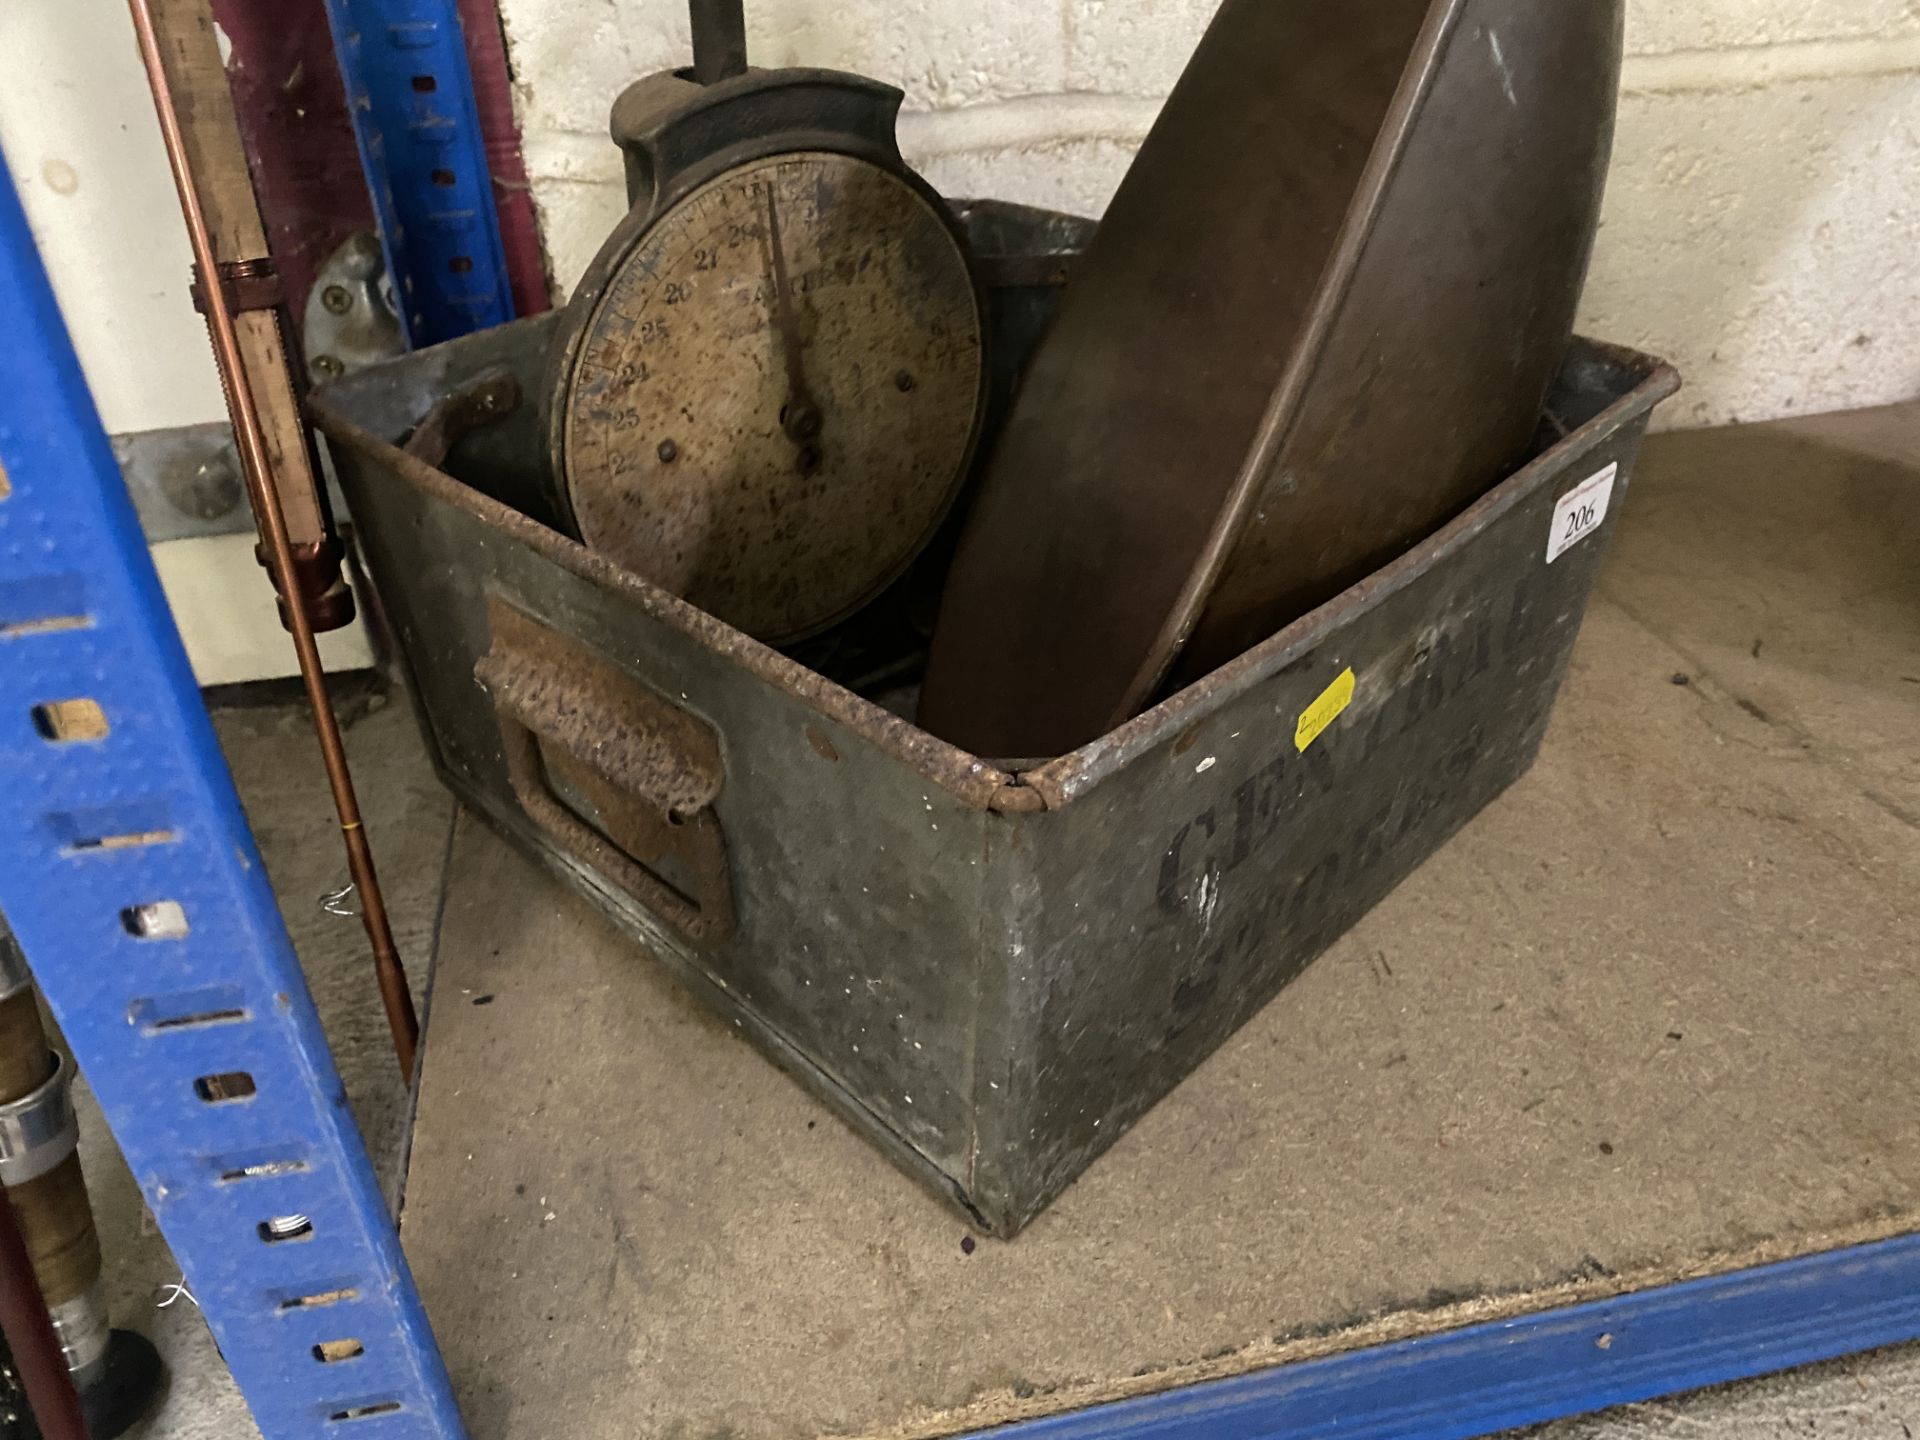 A Central Stores storage bin, scales